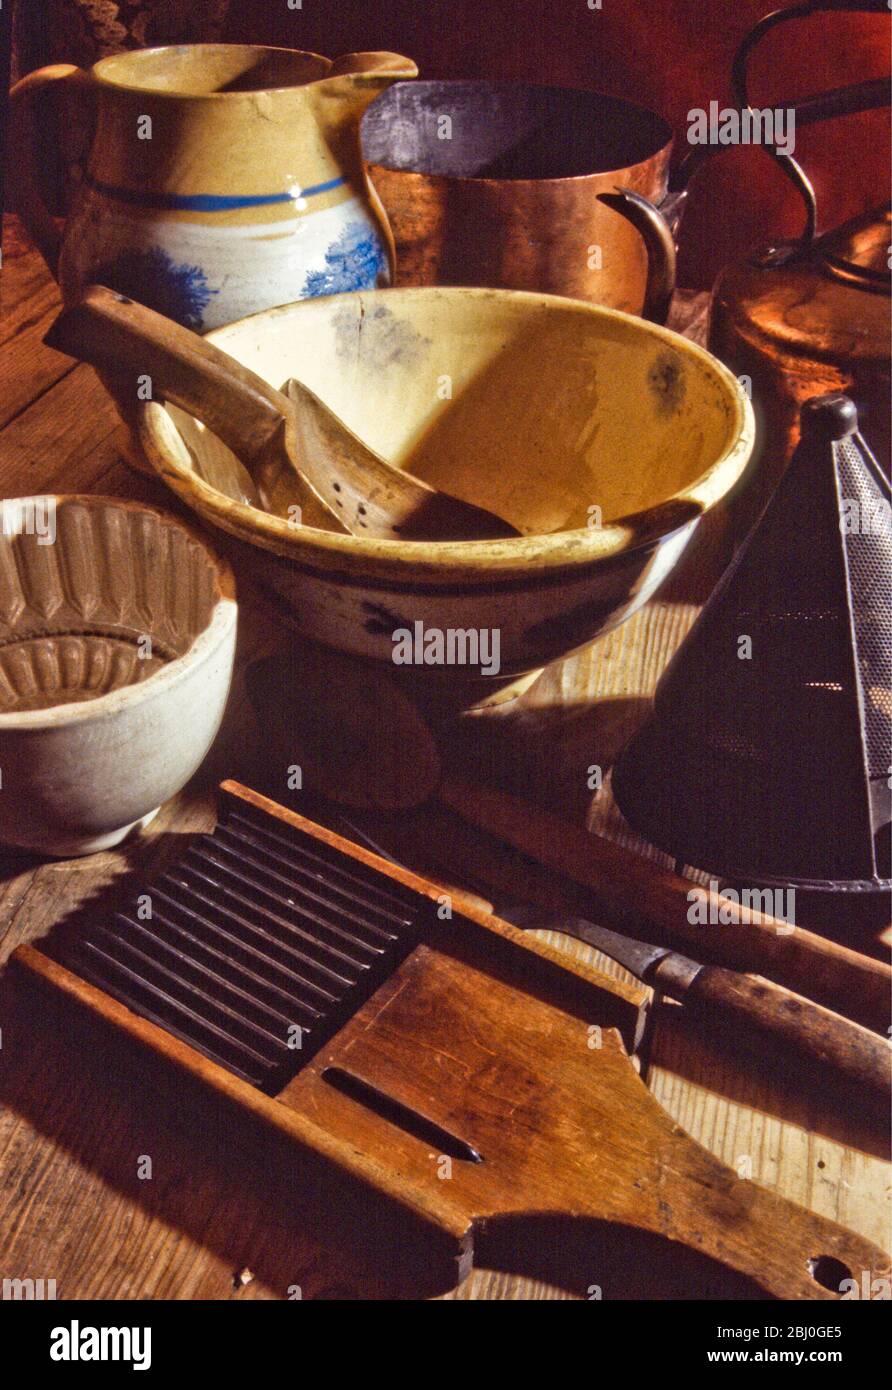 A collection of old and antique kitchenalia, tools and equipment including jugs, bowls, moulds, sieve, pans, and kettle in china, metal and copper. - Stock Photo